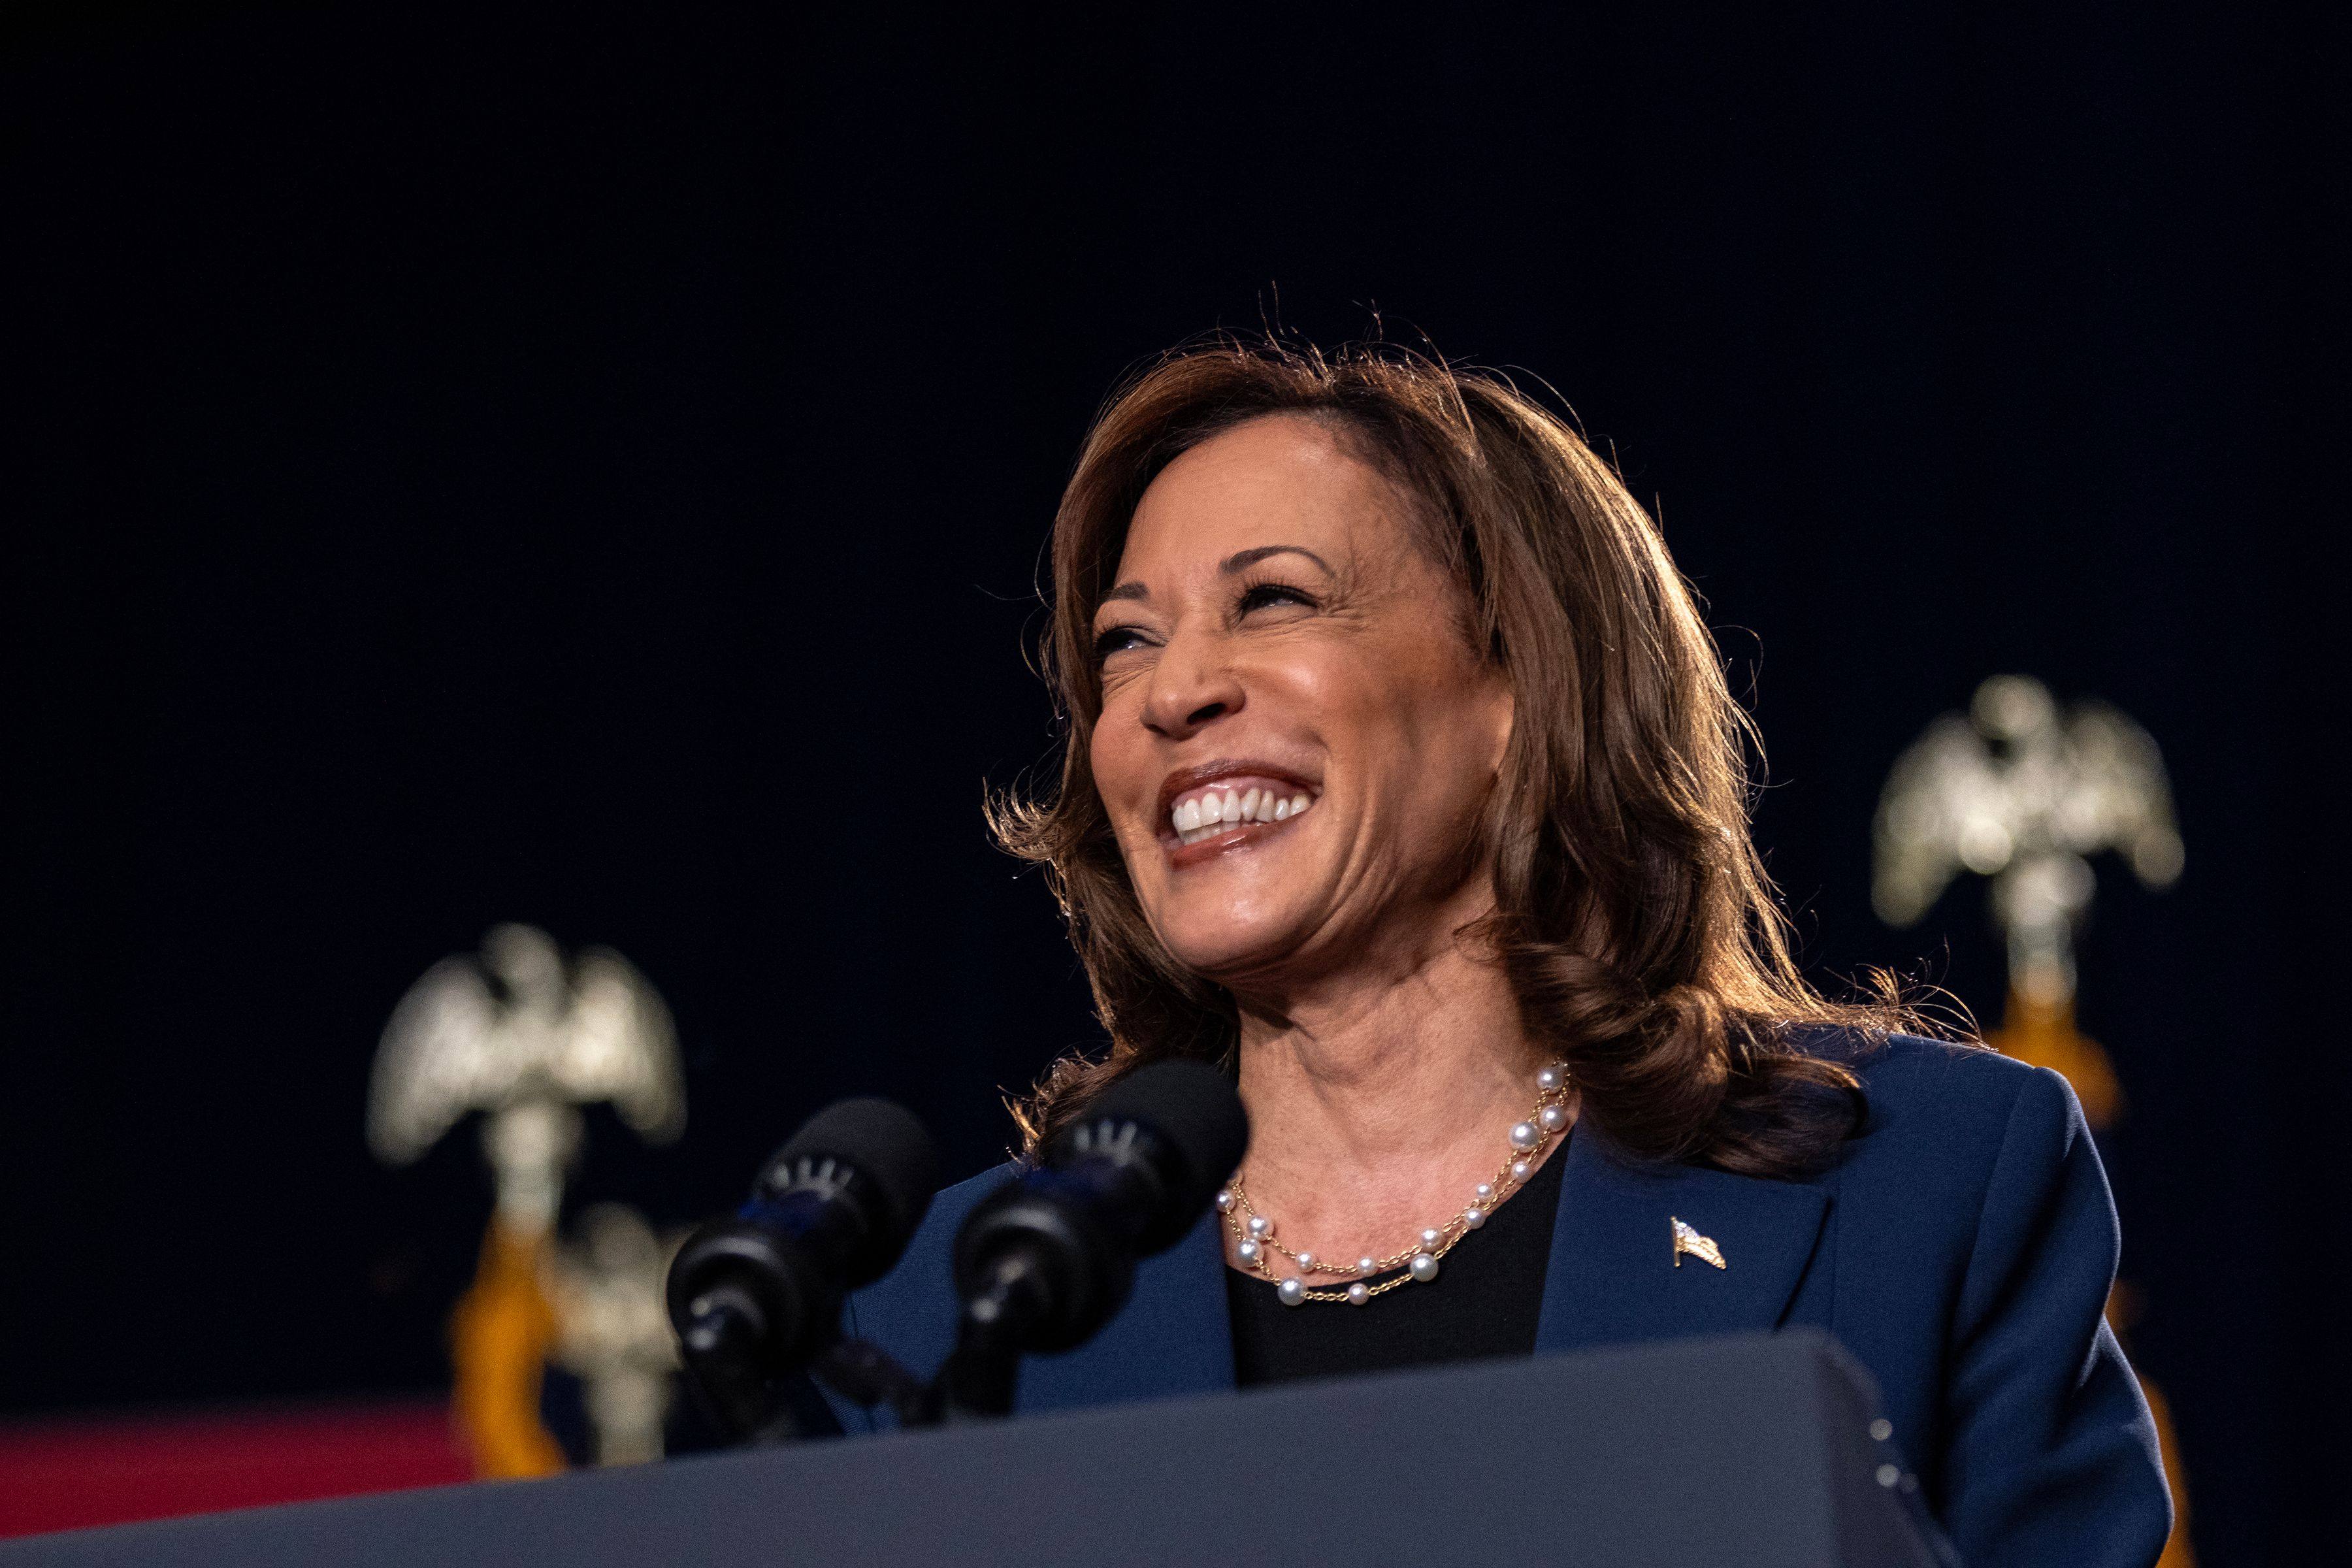 US Vice-President Kamala Harris speaks at West Allis Central High School during her first campaign rally in Milwaukee, Wisconsin, on Tuesday. Photo: AFP